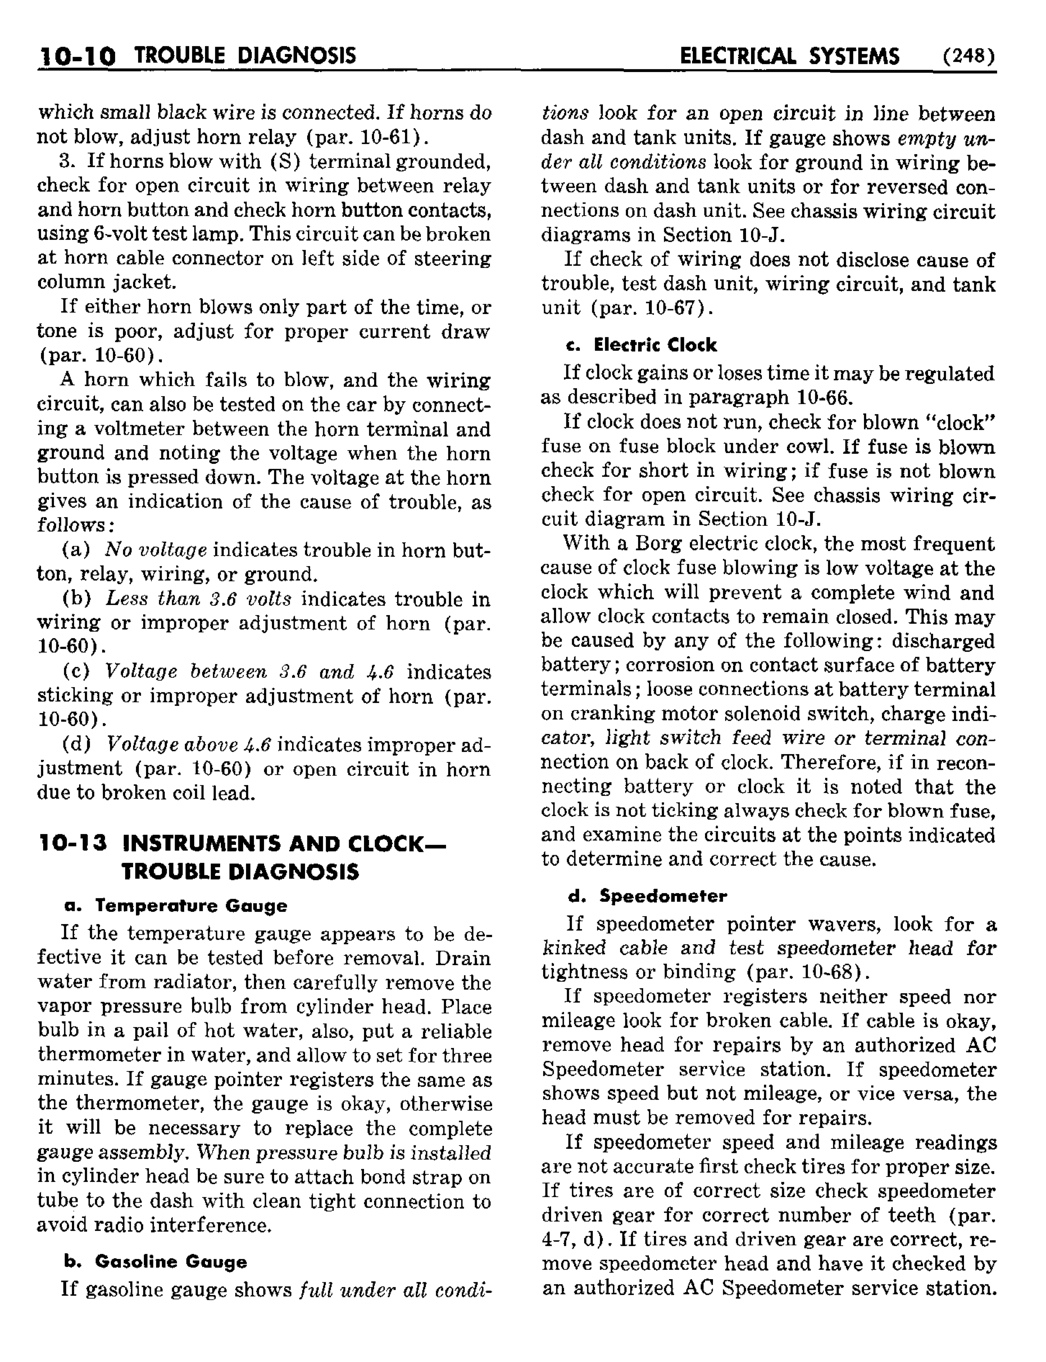 n_11 1950 Buick Shop Manual - Electrical Systems-010-010.jpg